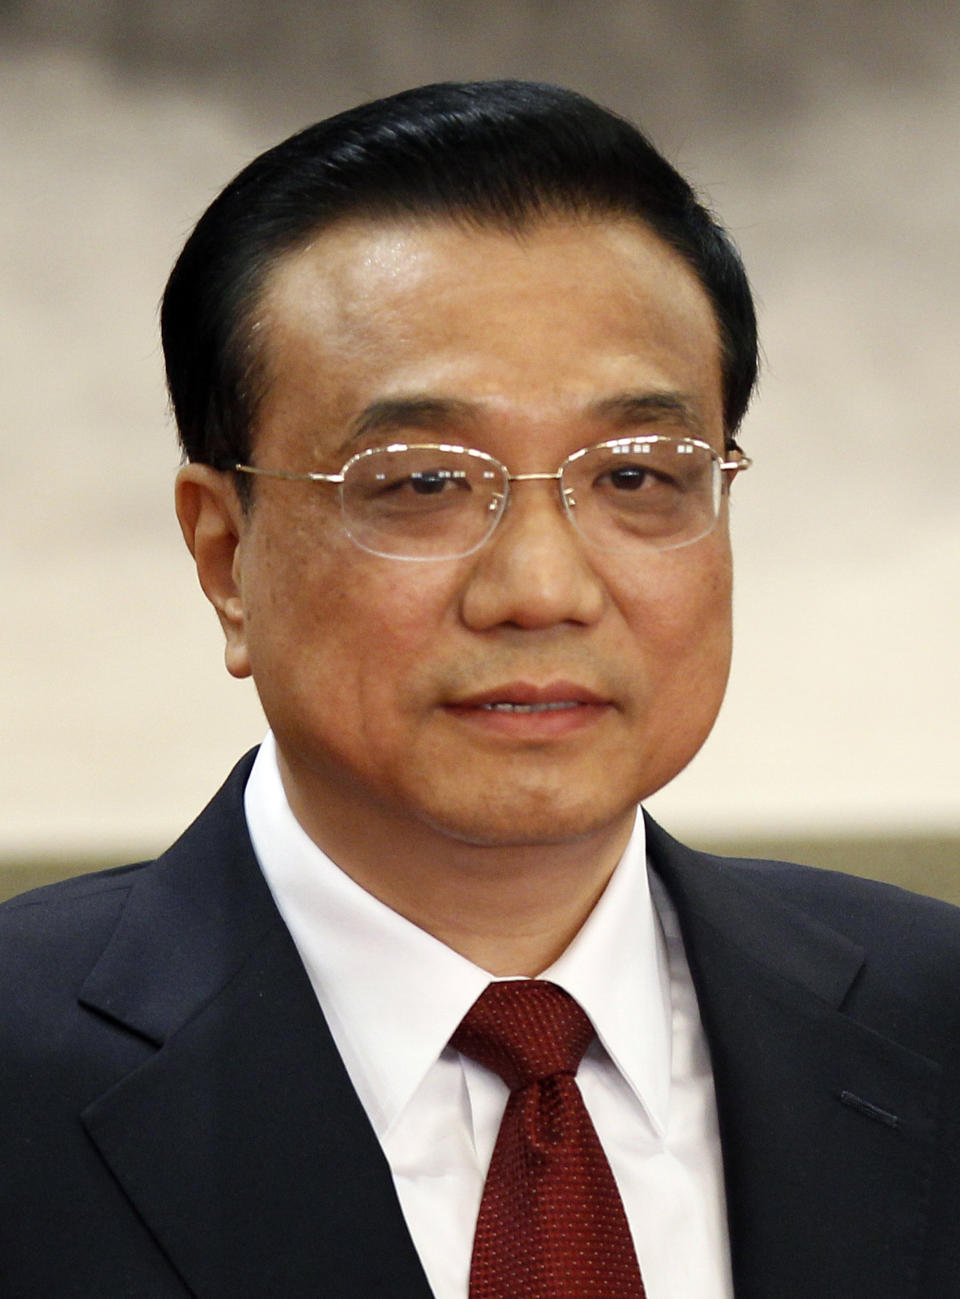 Li Keqiang, one of the seven newly elected members of the Politburo Standing Committee, attends a press event at Beijing's Great Hall of the People, Thursday Nov. 15, 2012. The seven-member Standing Committee, the inner circle of Chinese political power, was paraded in front of assembled media on the first day following the end of the 18th Communist Party Congress. (AP Photo/Vincent Yu)